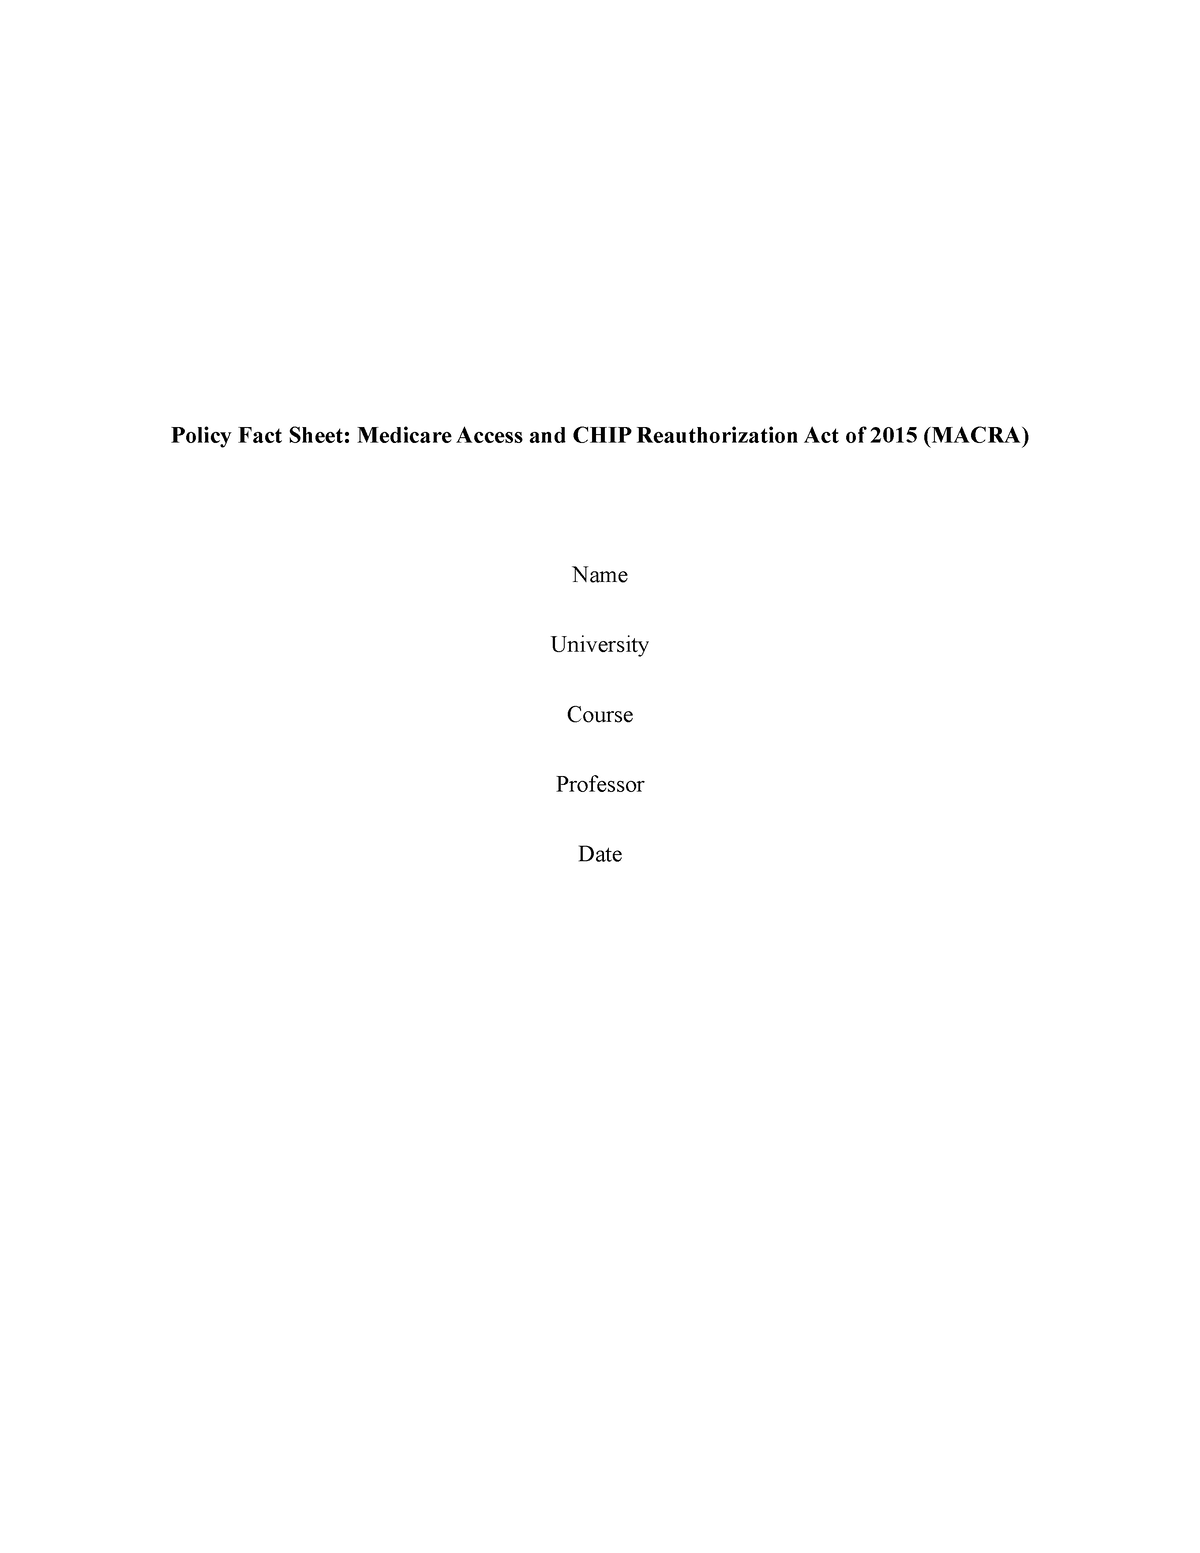 Policy Fact Sheet Medicare Access And Chip Reauthorization Act Of 2015 Macra Policy Fact 0713